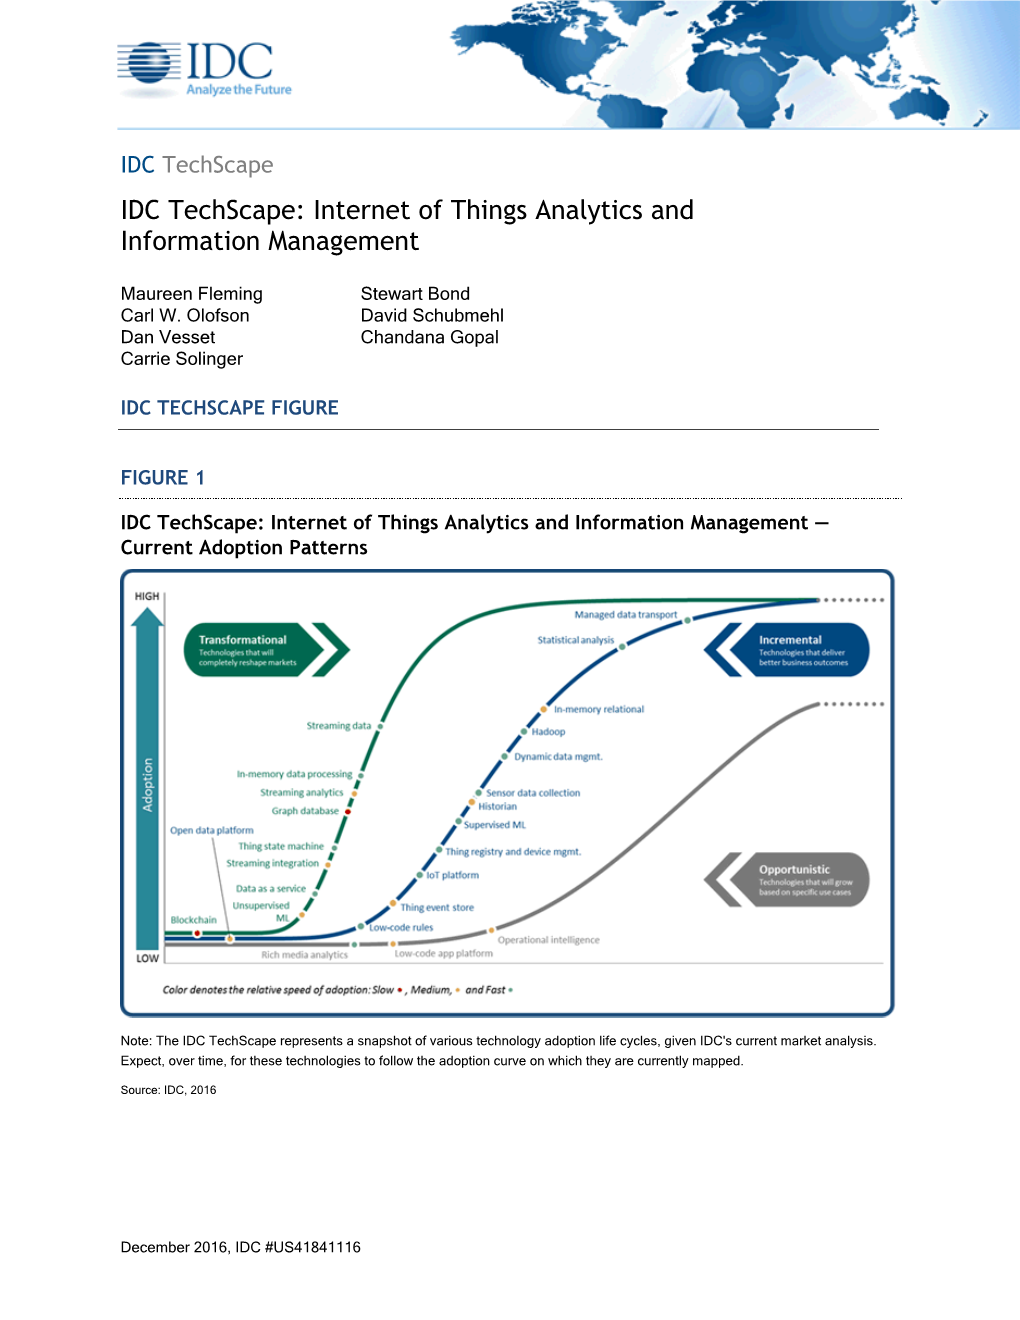 IDC Techscape IDC Techscape: Internet of Things Analytics and Information Management